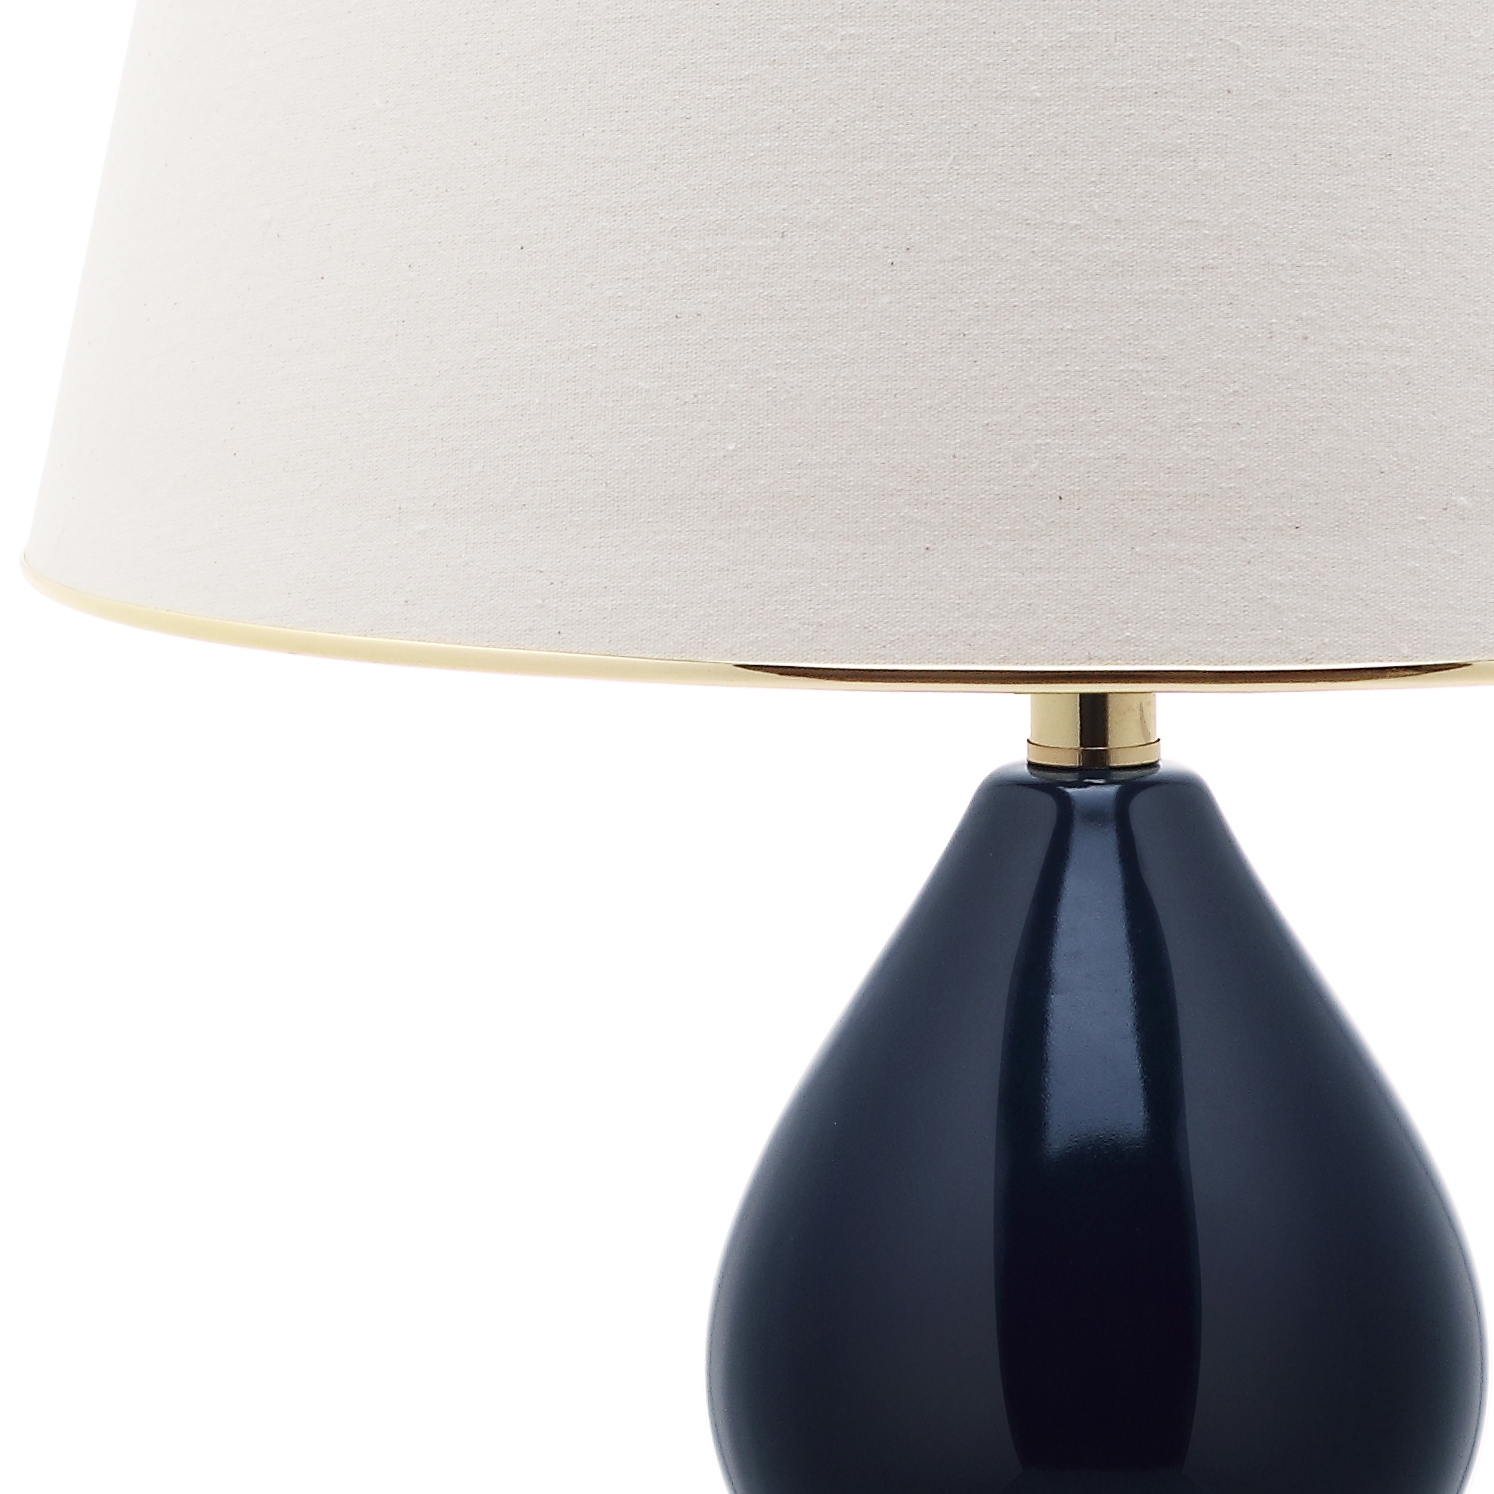 Jill 26.5-Inch H Double- Gourd Ceramic Table Lamp - Navy - Arlo Home - Image 2